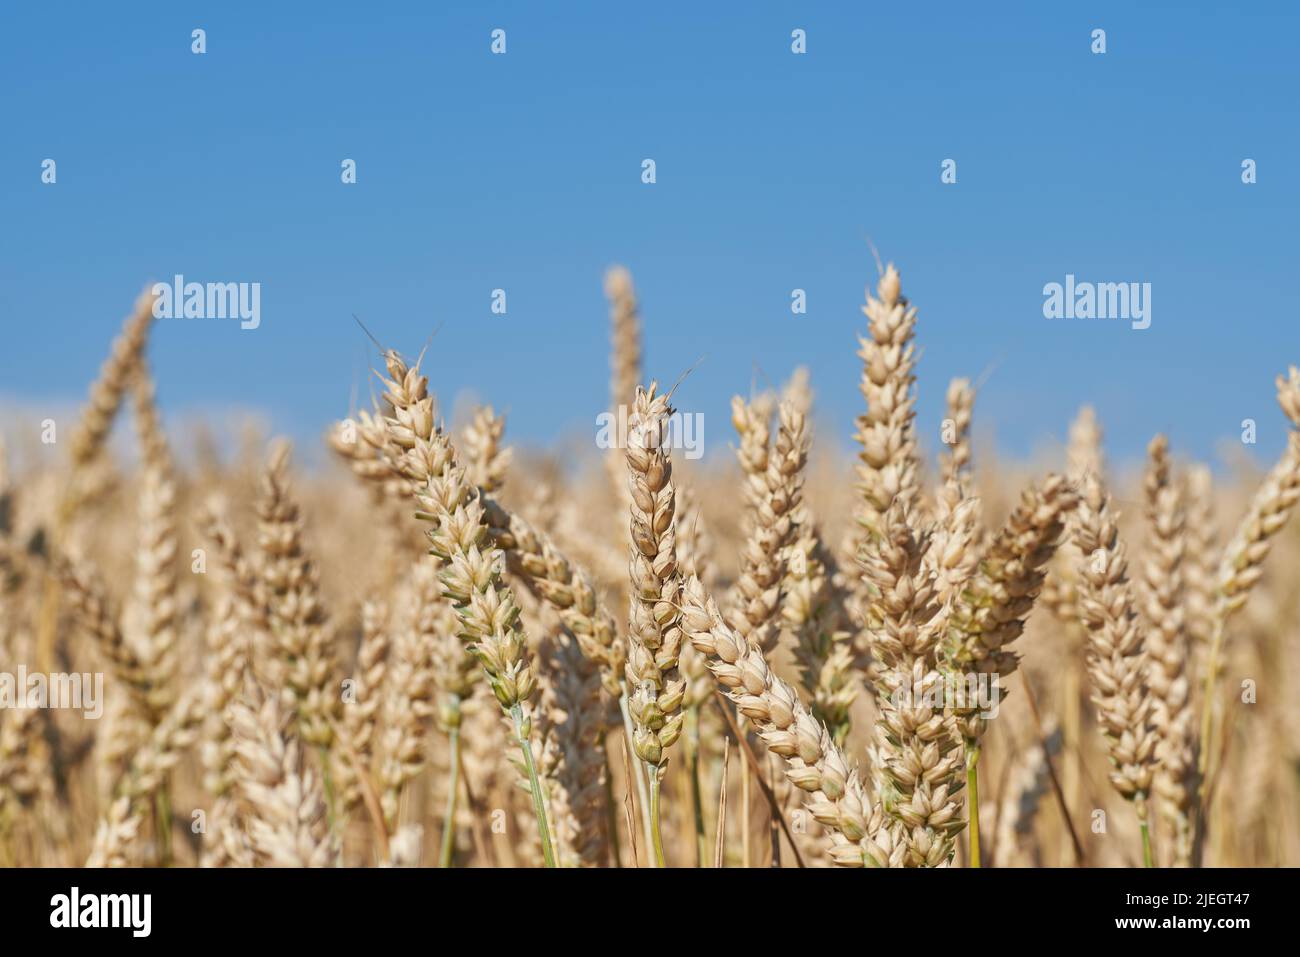 Front view of ears of grain, wheat or rye with blurred background and blue sky on a summer day Stock Photo